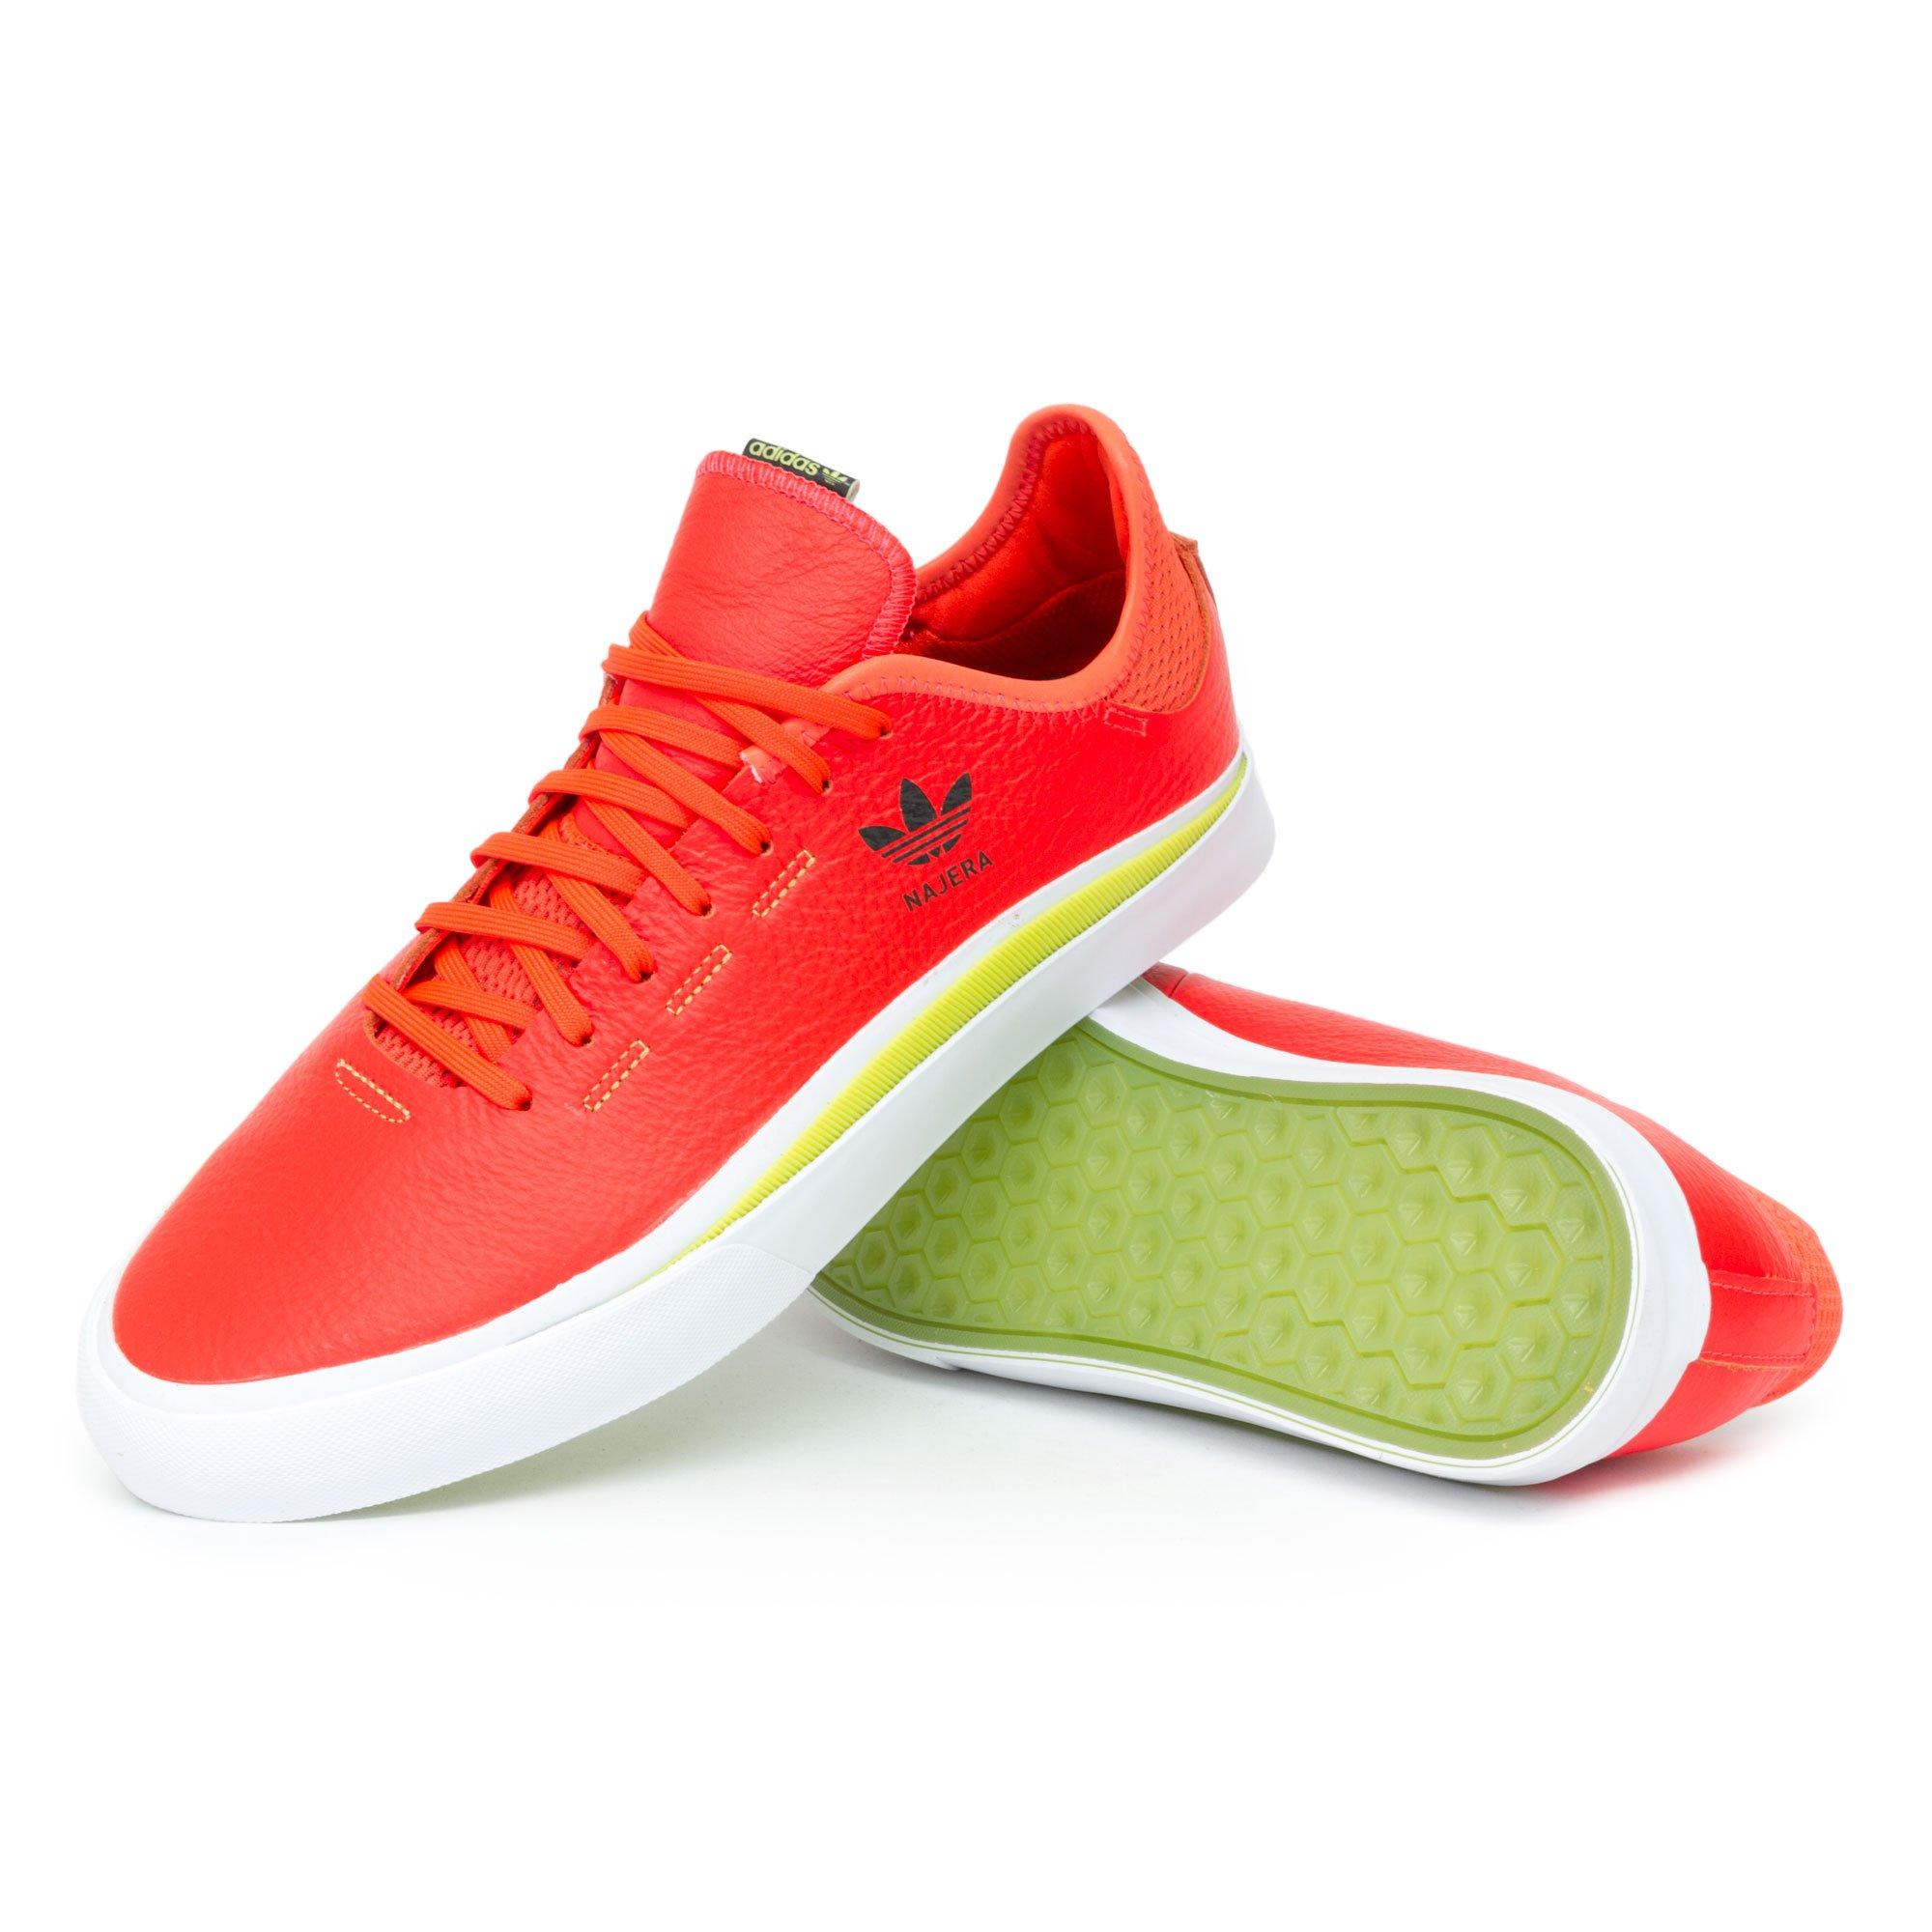 Adidas Najera Shoe Flash Sales, UP TO 53% OFF | www.pcyredes.com